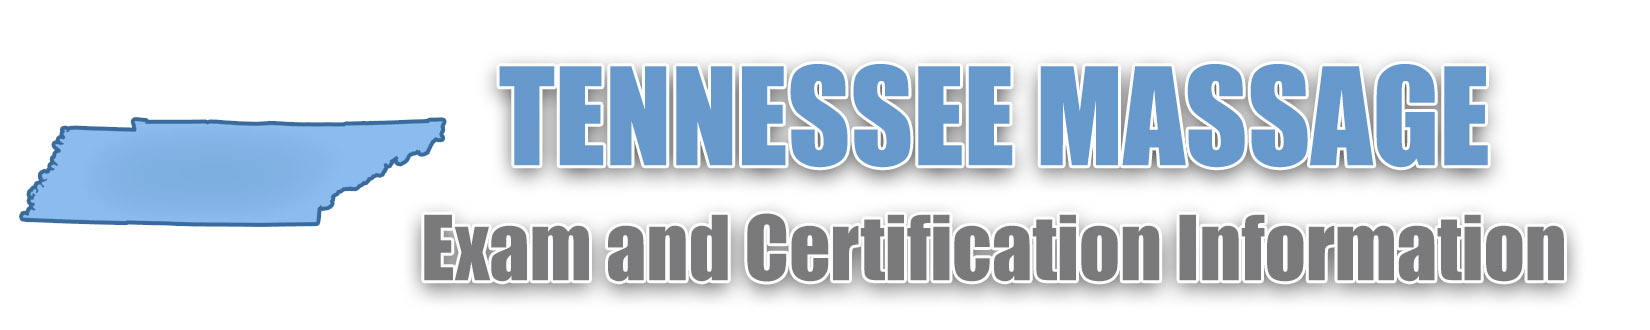 Tennessee MBLEX Massage Exam and Certification Information